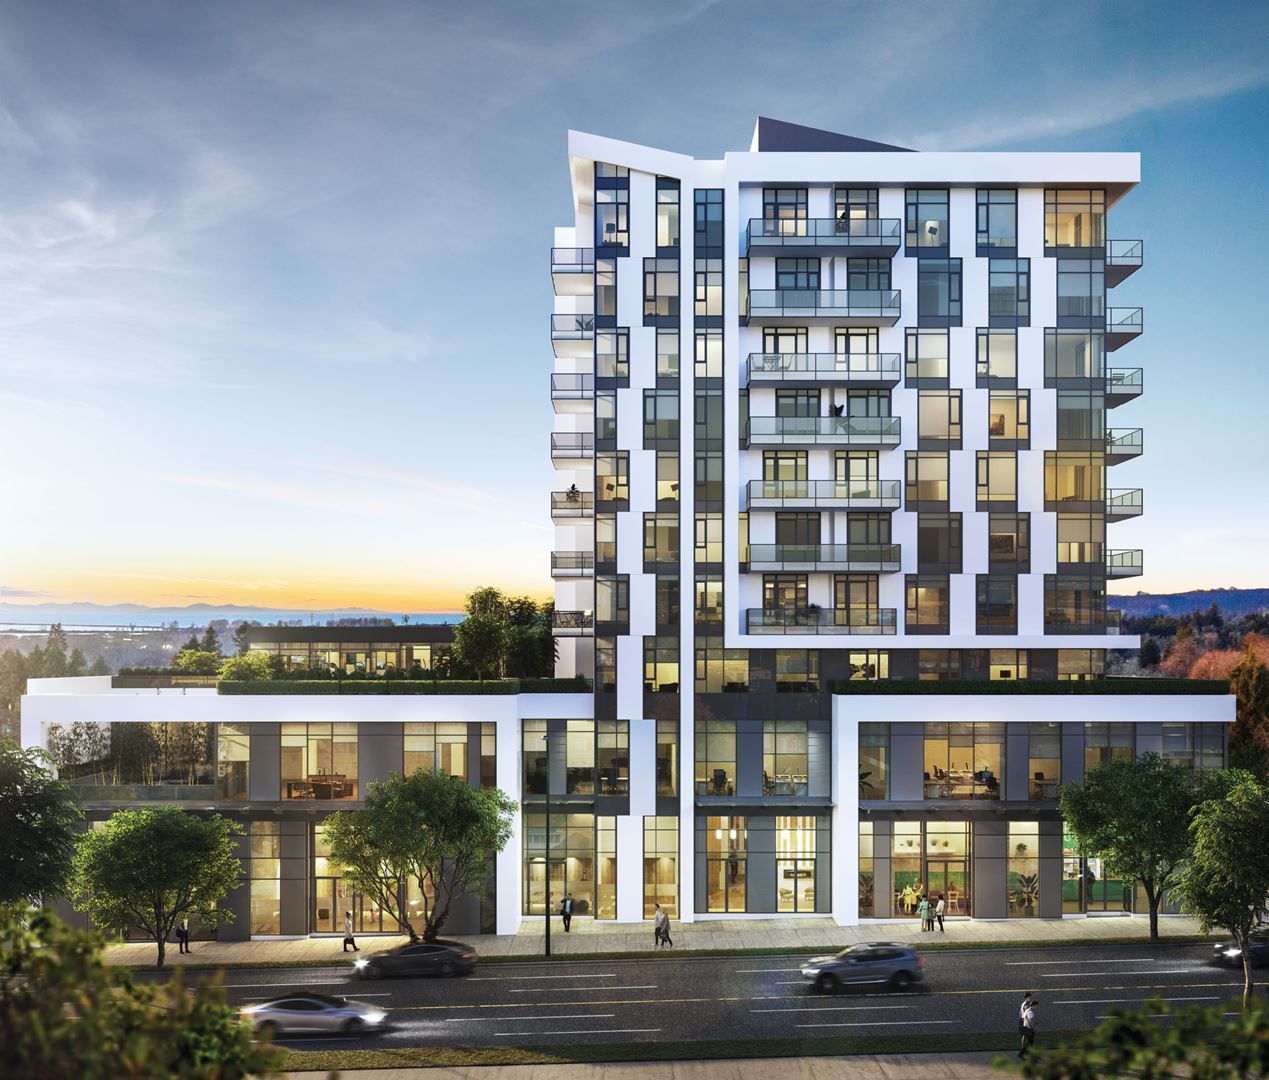 This 10-storey, mixed-use West Side highrise offers a selection of 64 1- to 3-bedroom condos.